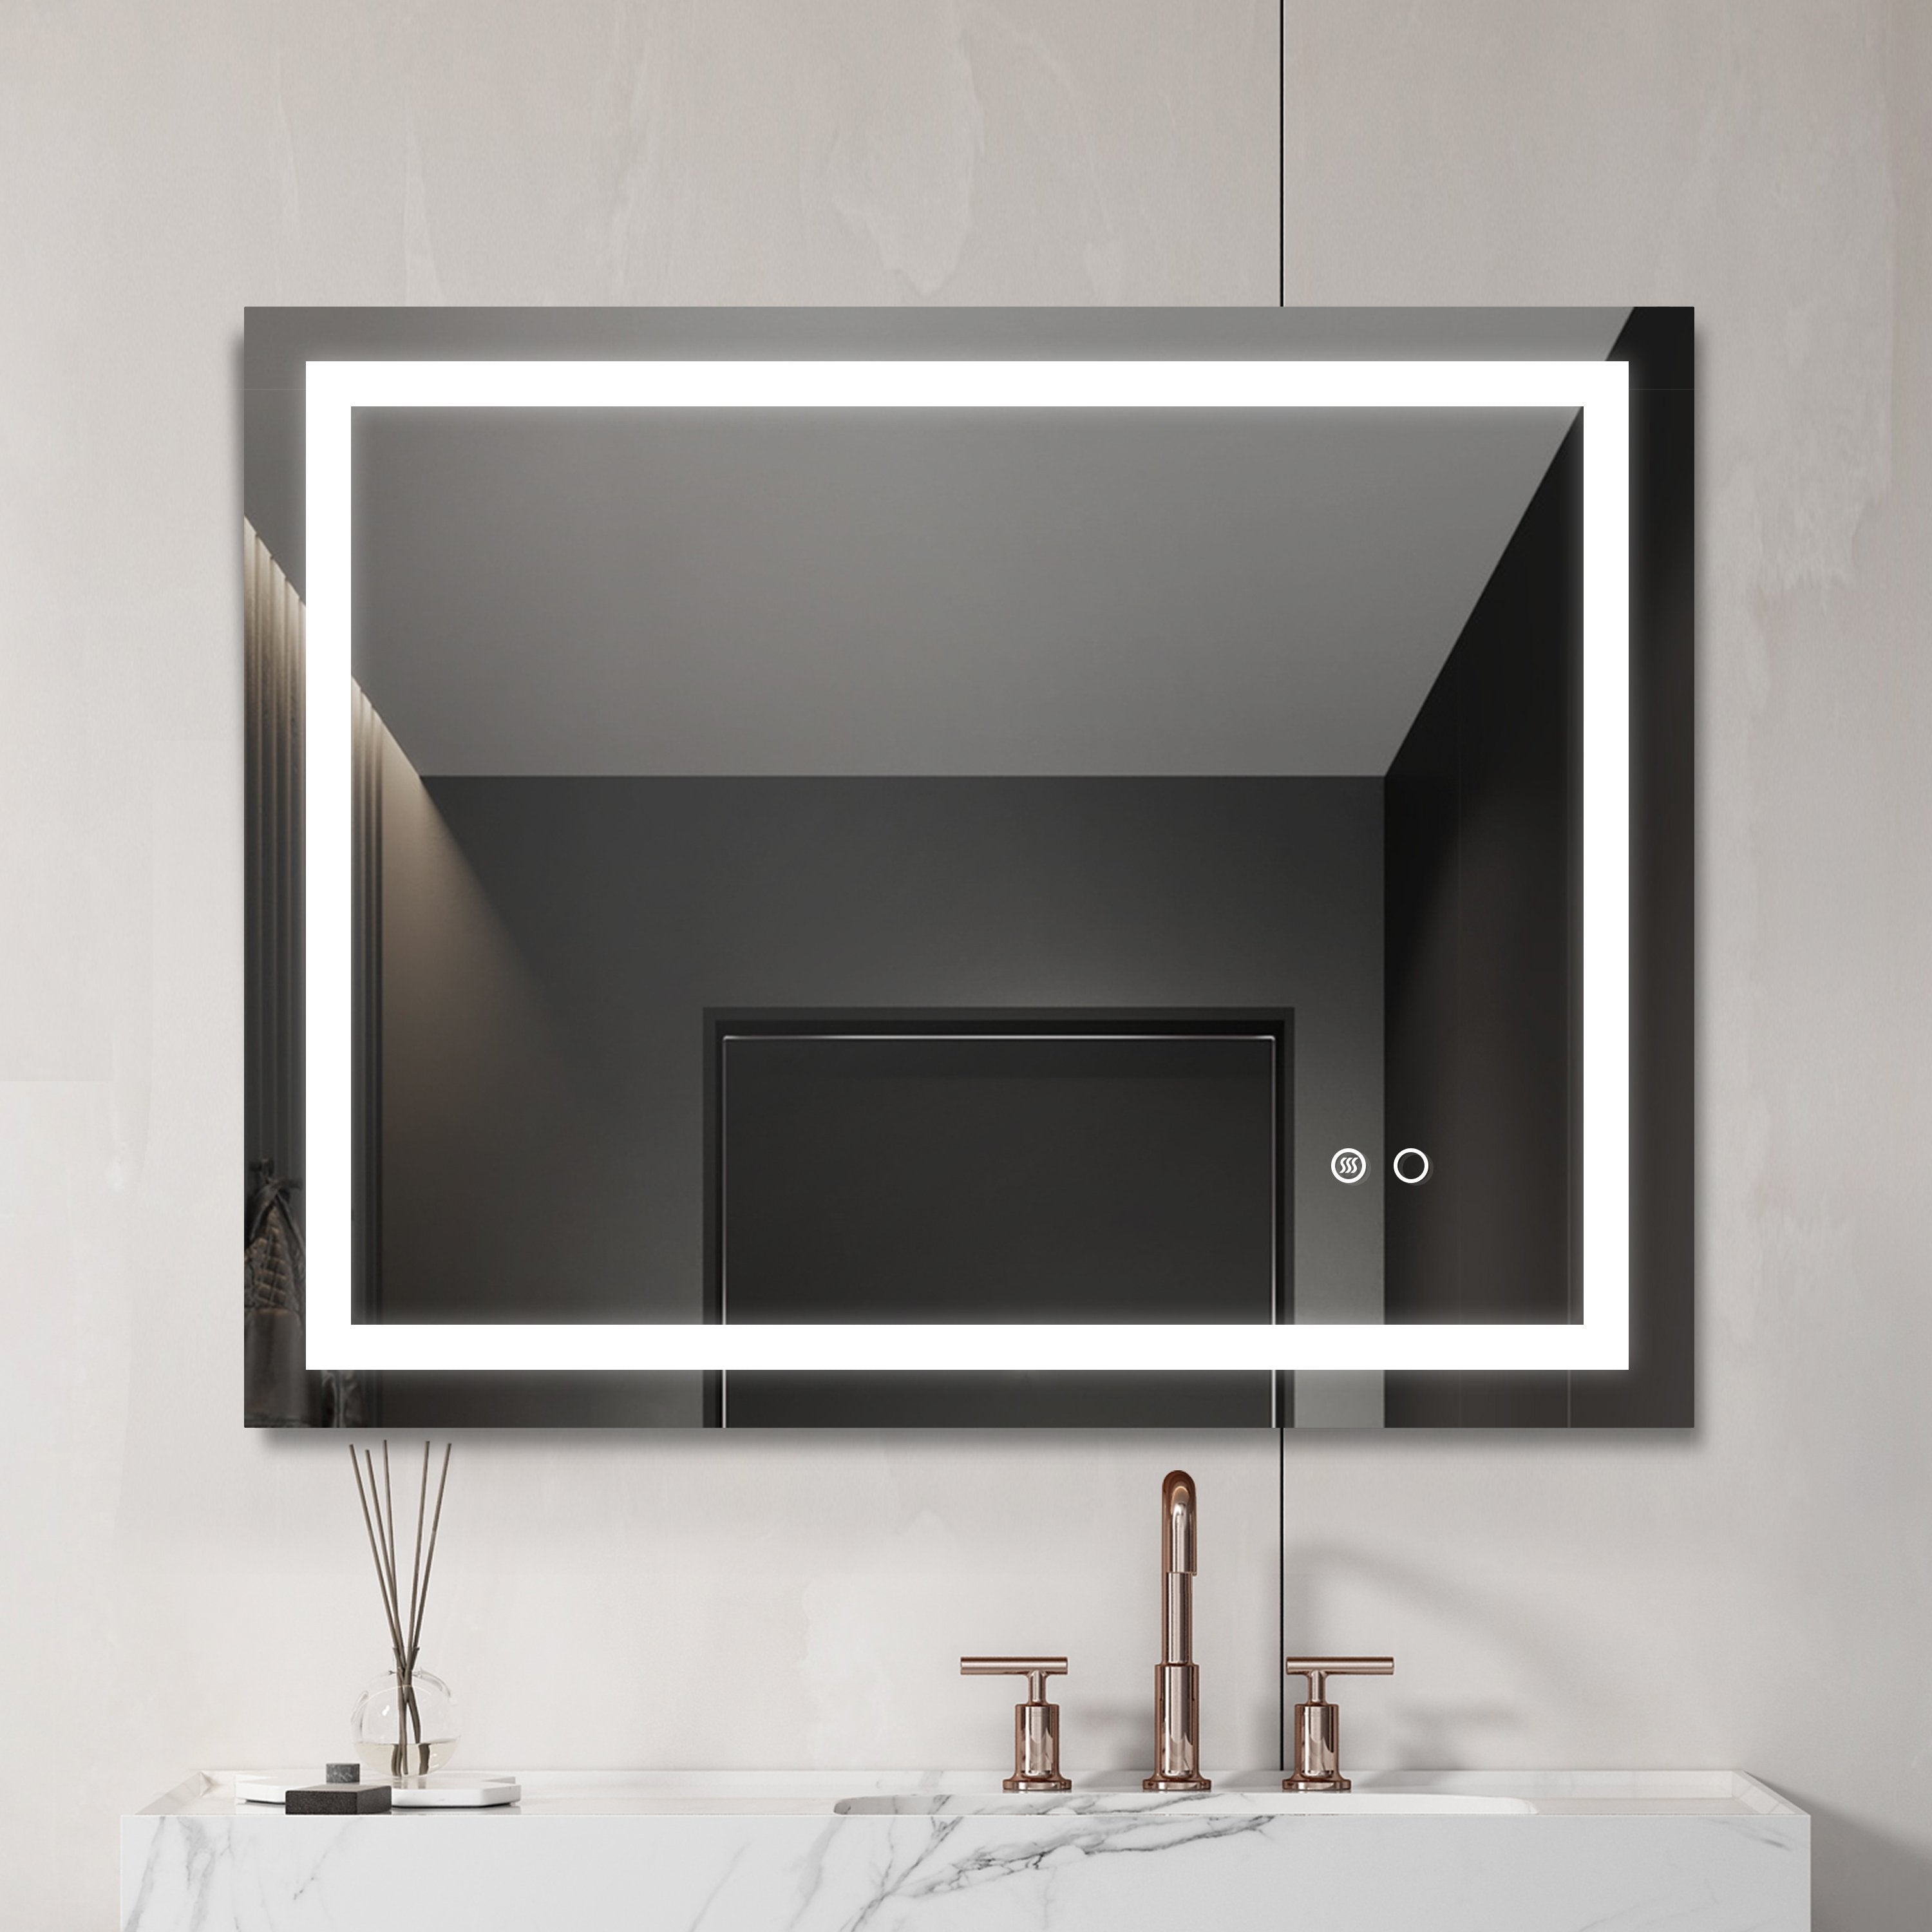 28"*36" inch LED Lighted Bathroom Wall Mounted Mirror with High Lumen+Anti-Fog Separately Control+Dimmer Function-Boyel Living